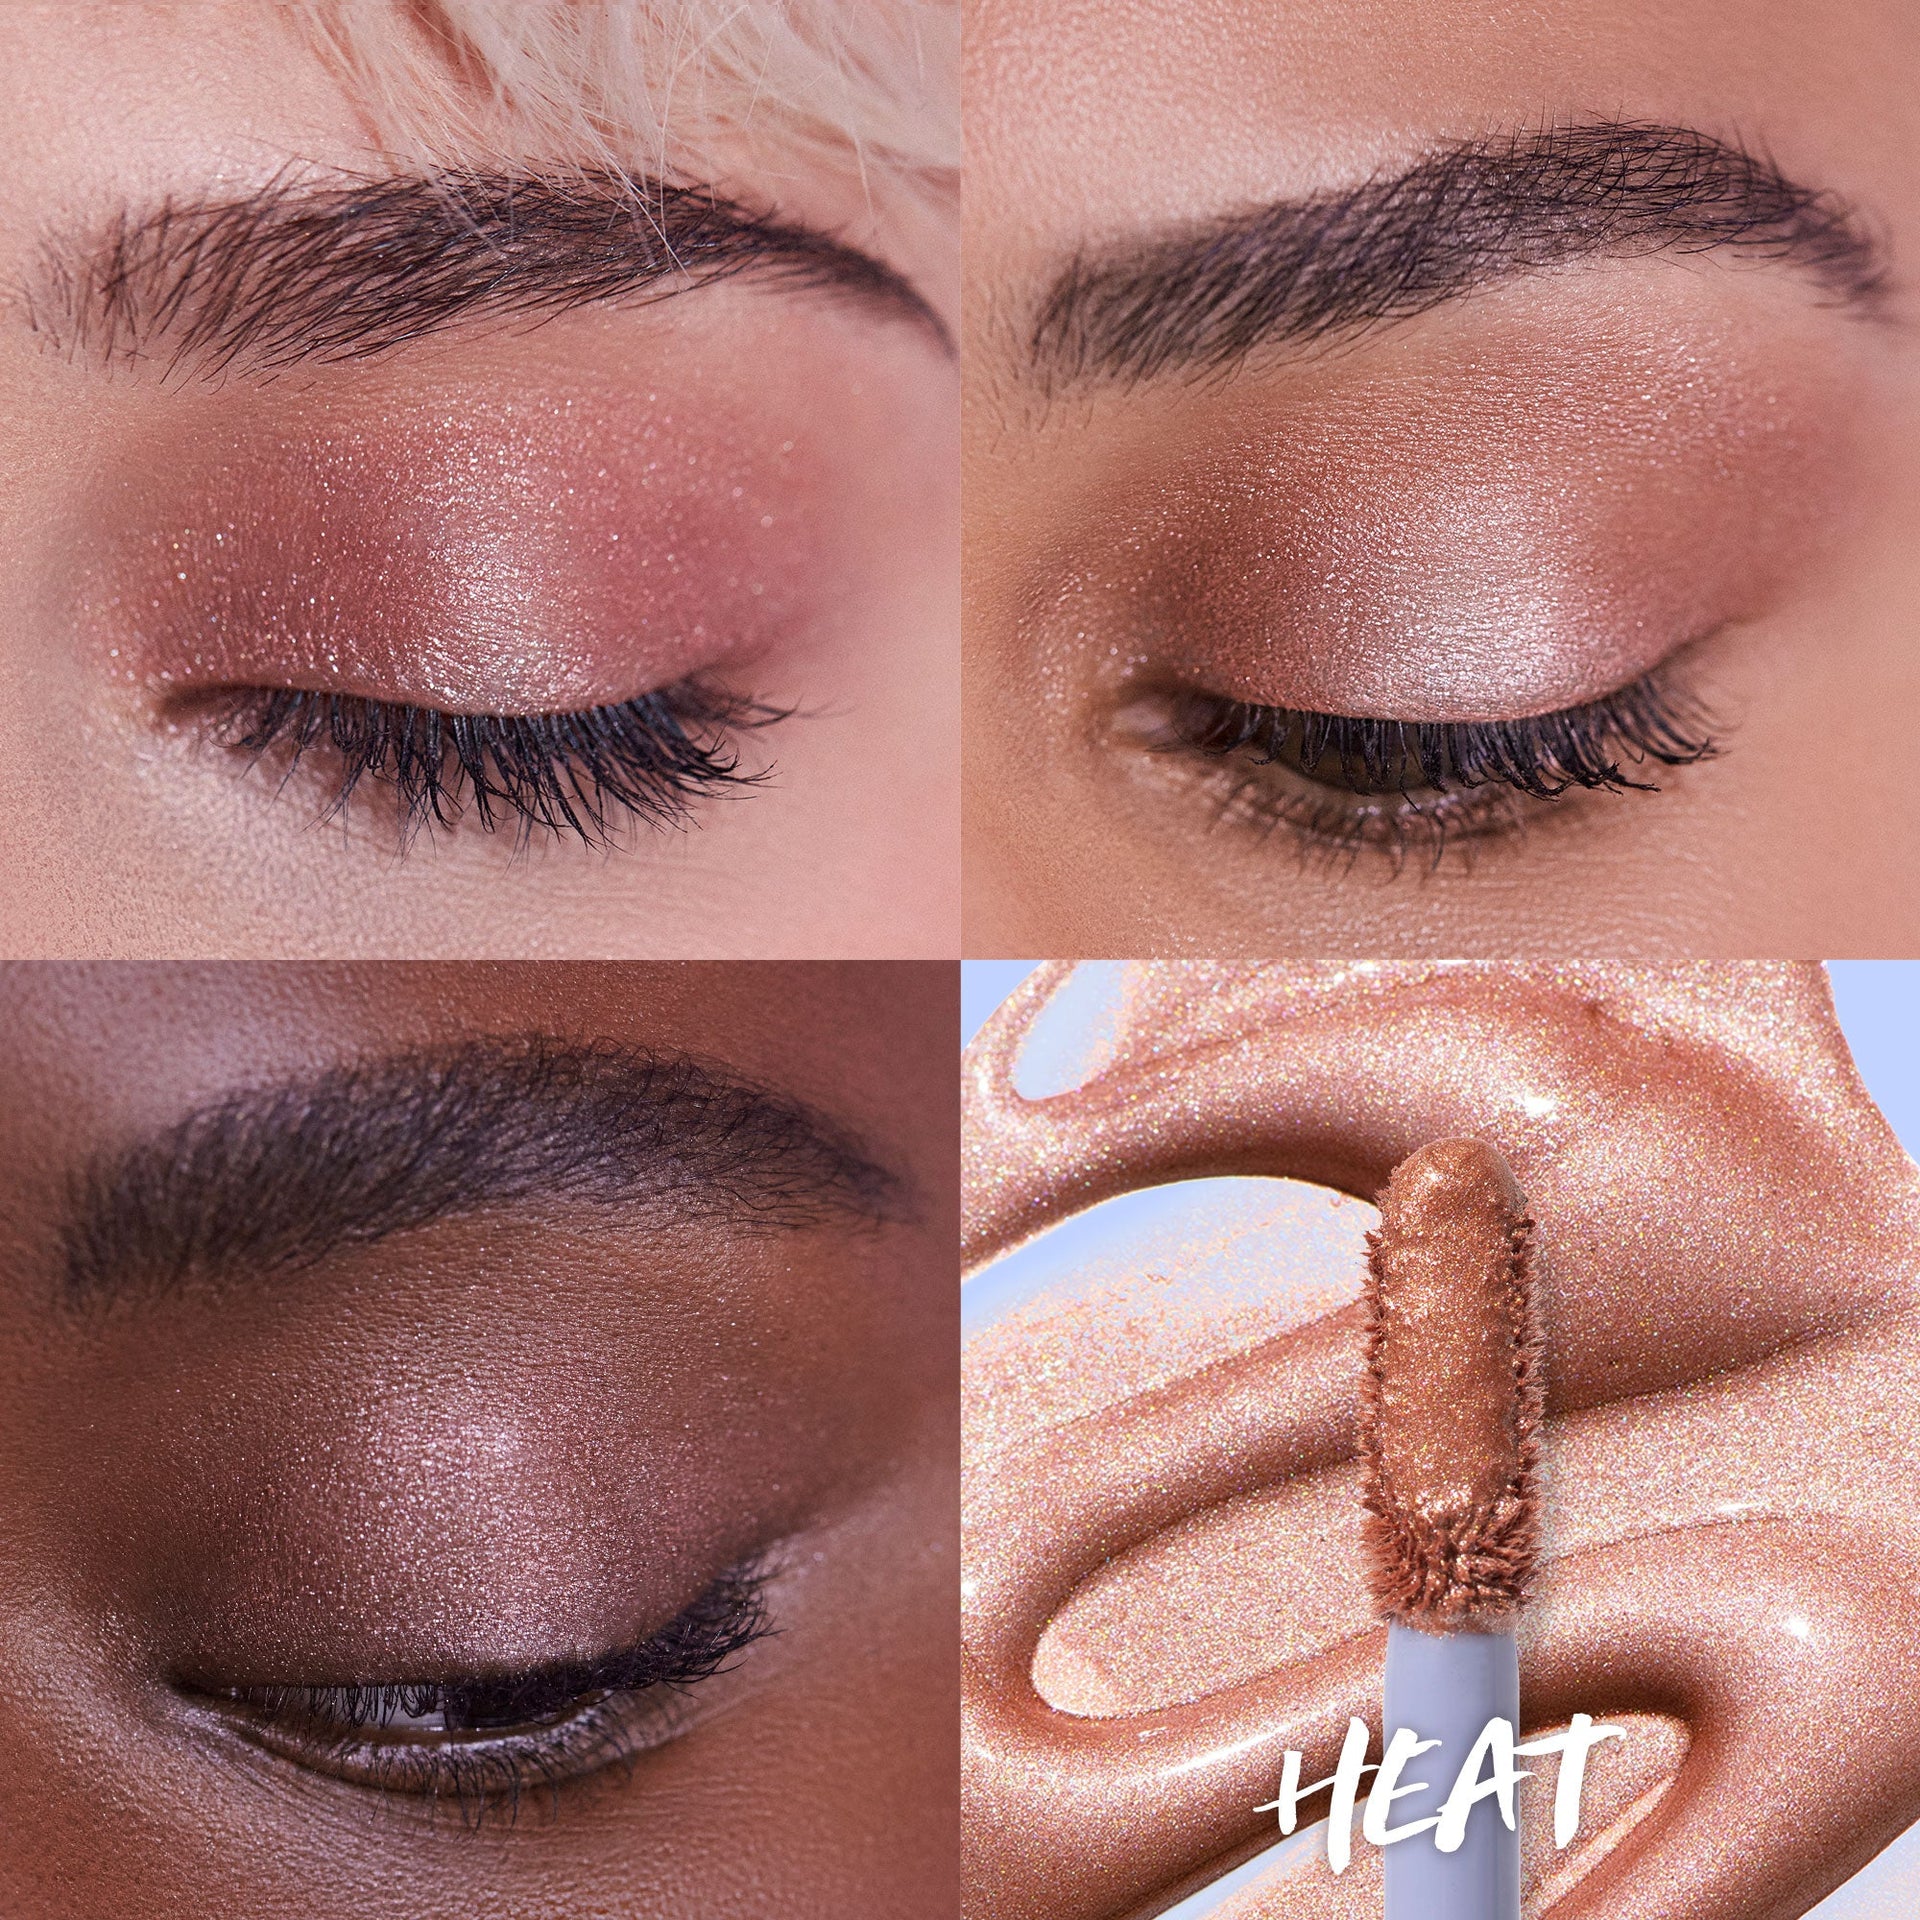 Close-up image featuring swatches of 10-second eye in the shade Heat when applied on different skin tones.